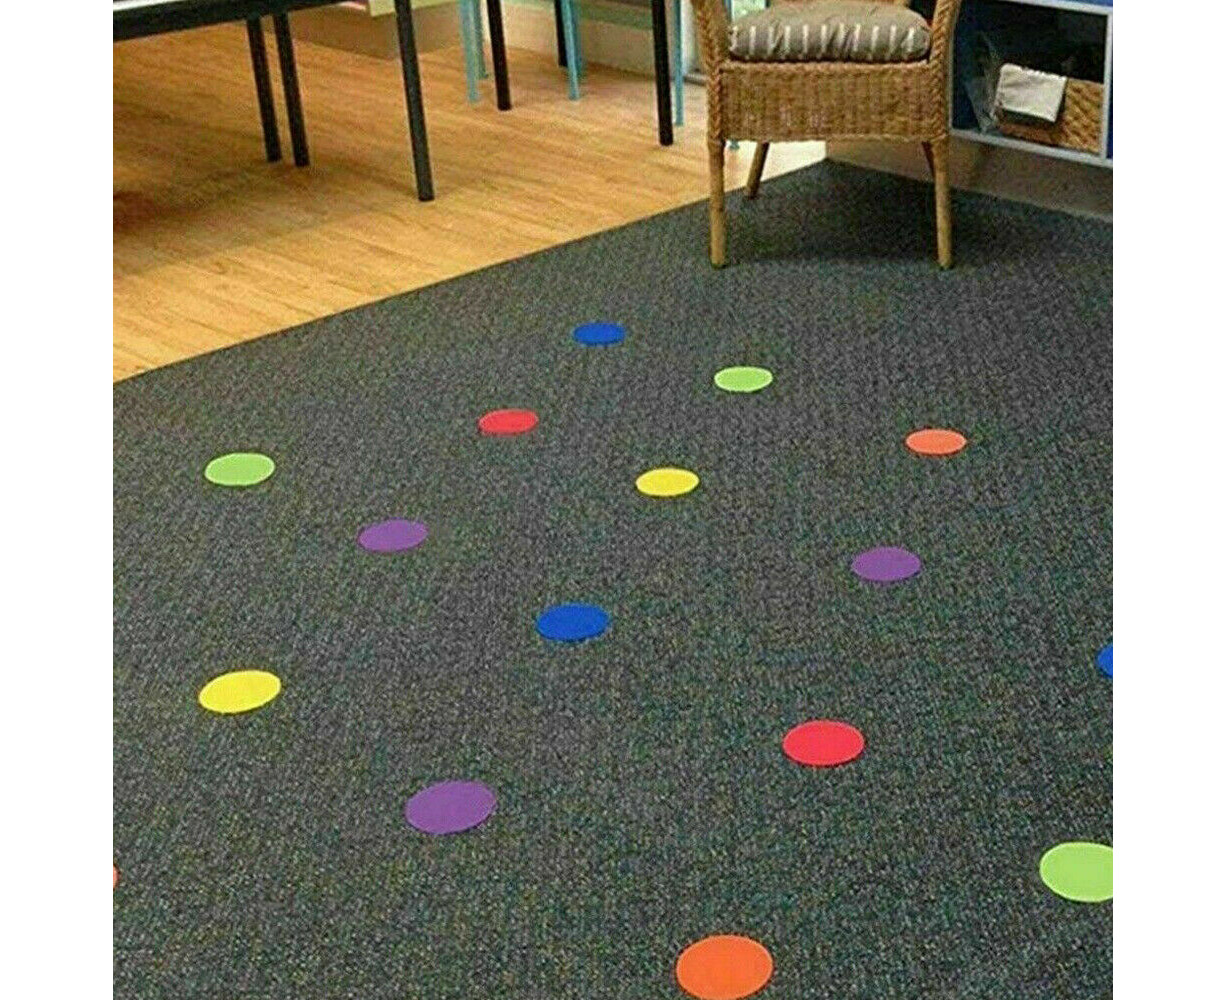 SitSpots® 30 Multi Color Star Pack (Size 4) - Floor Dots for Classroom |  The Original Sit Spots for Your Classroom Seating